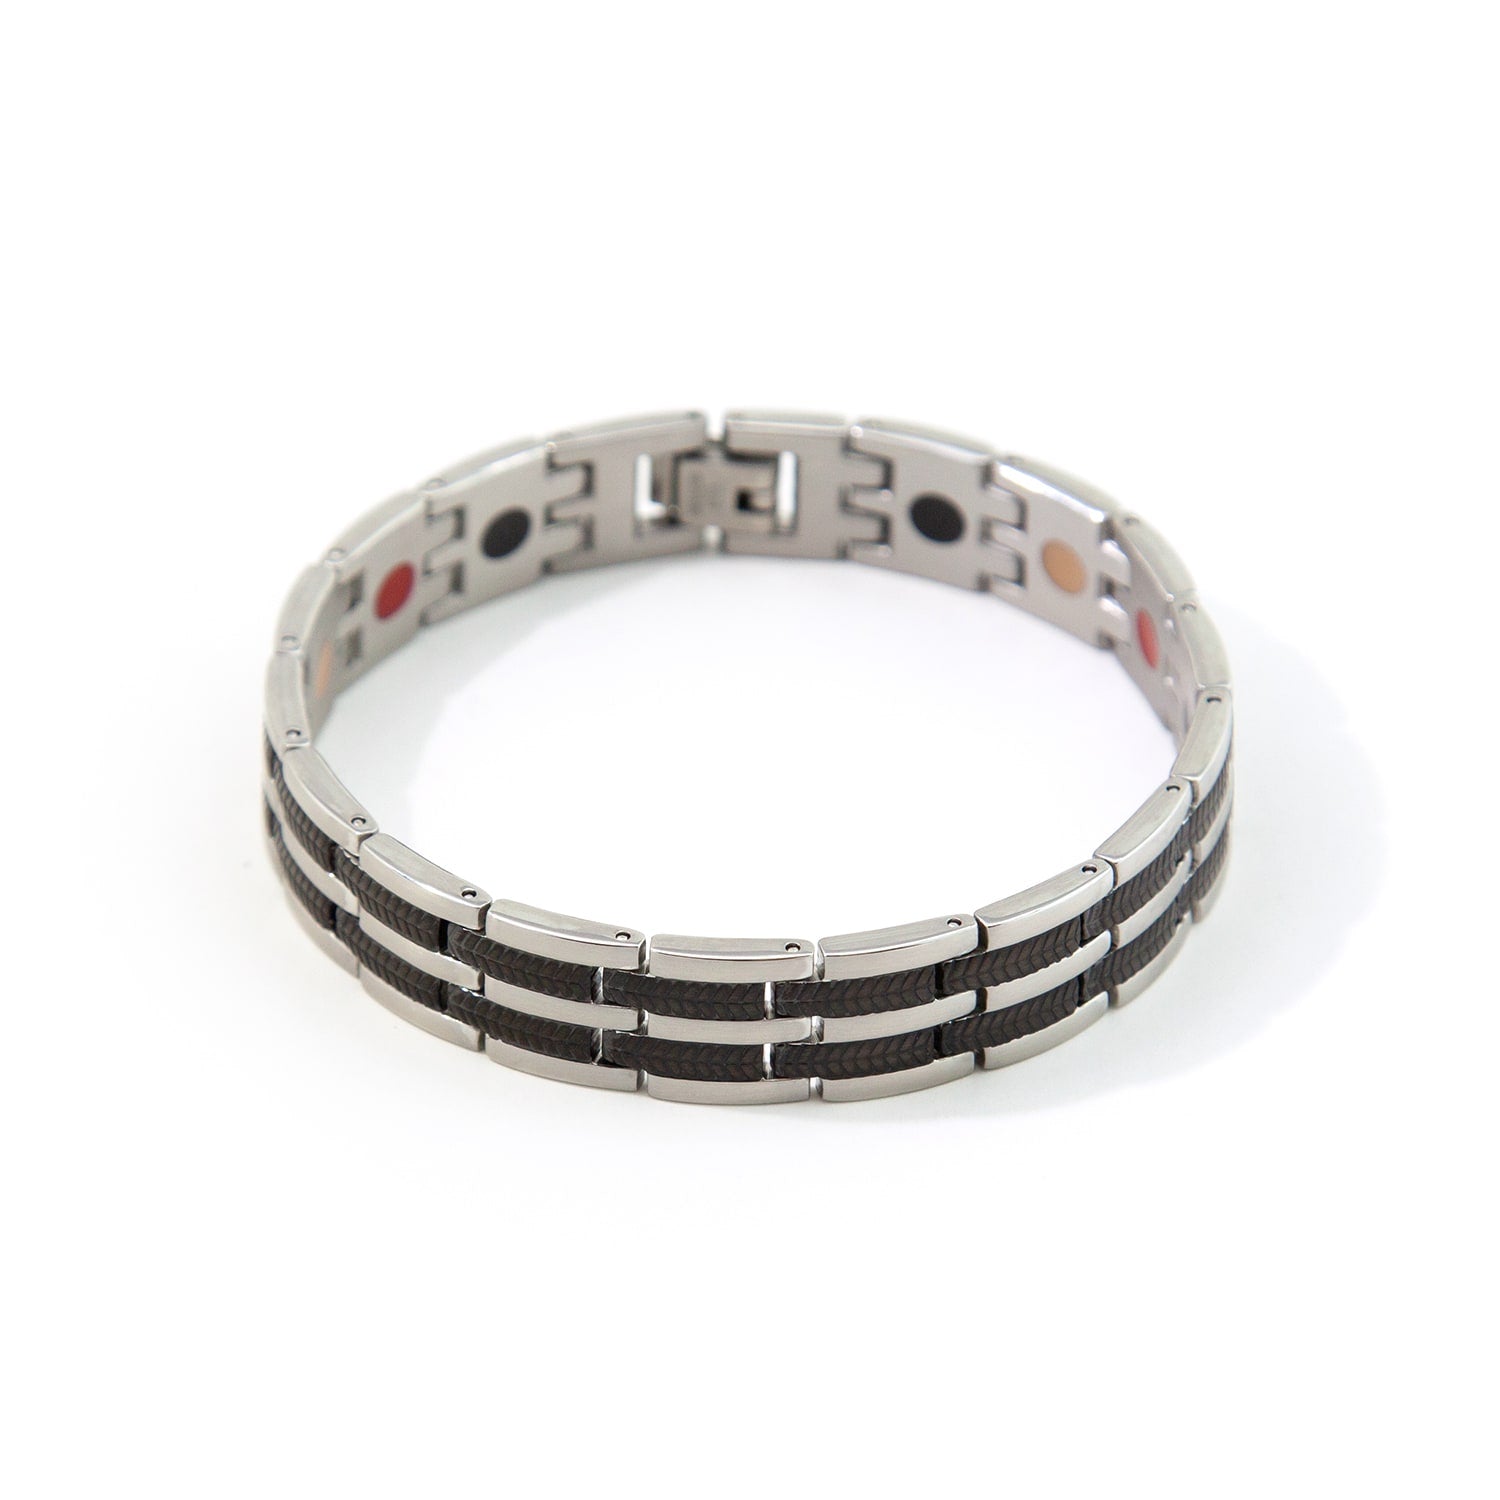 Electric - Negative Ion Bracelet - Stainless Steel with Black